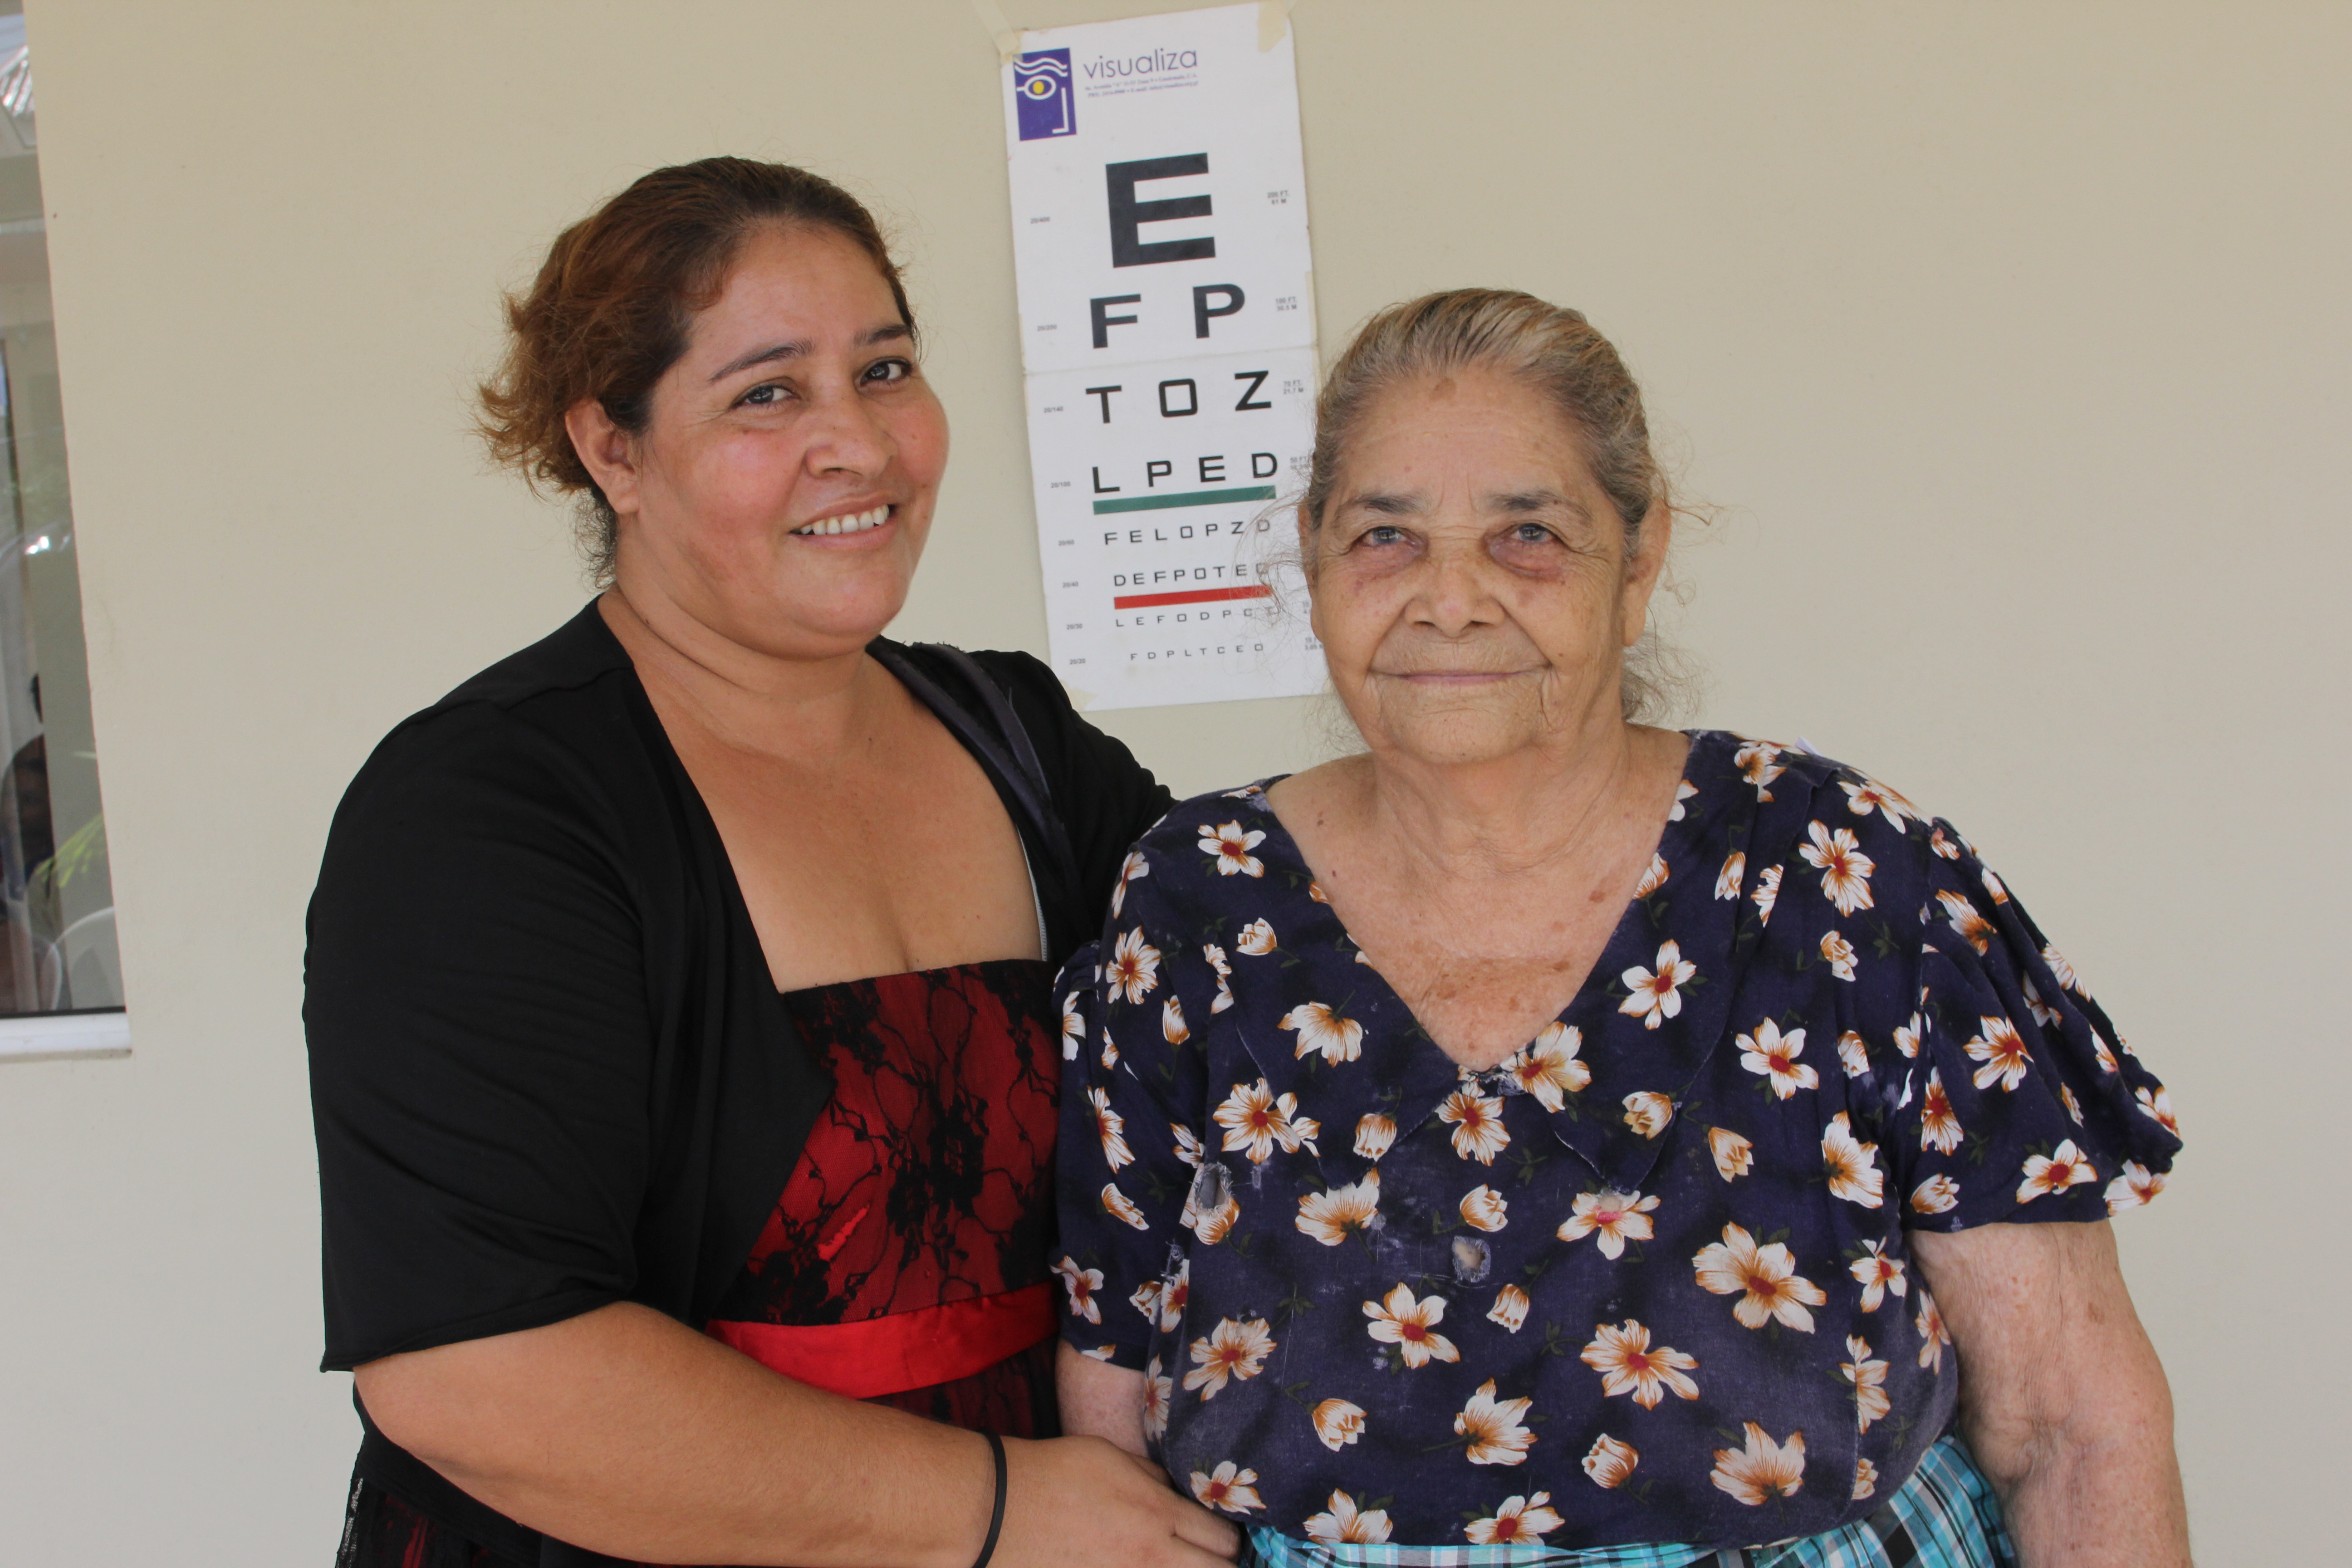 Two women stand in front of an eye chart